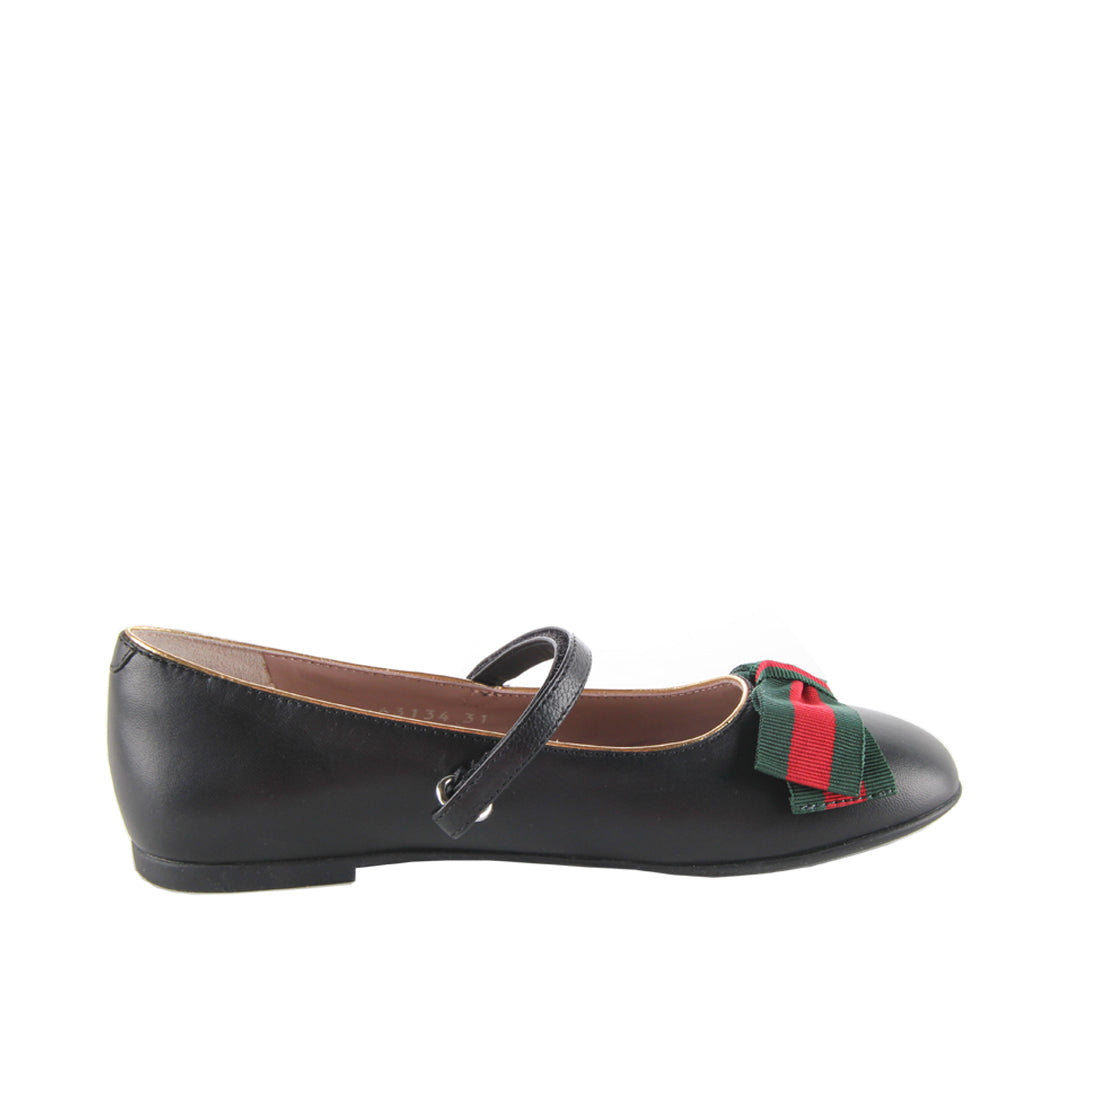 Gucci Girls Black Leather Ballet Flats with Web Bow - Retro Designer Wear